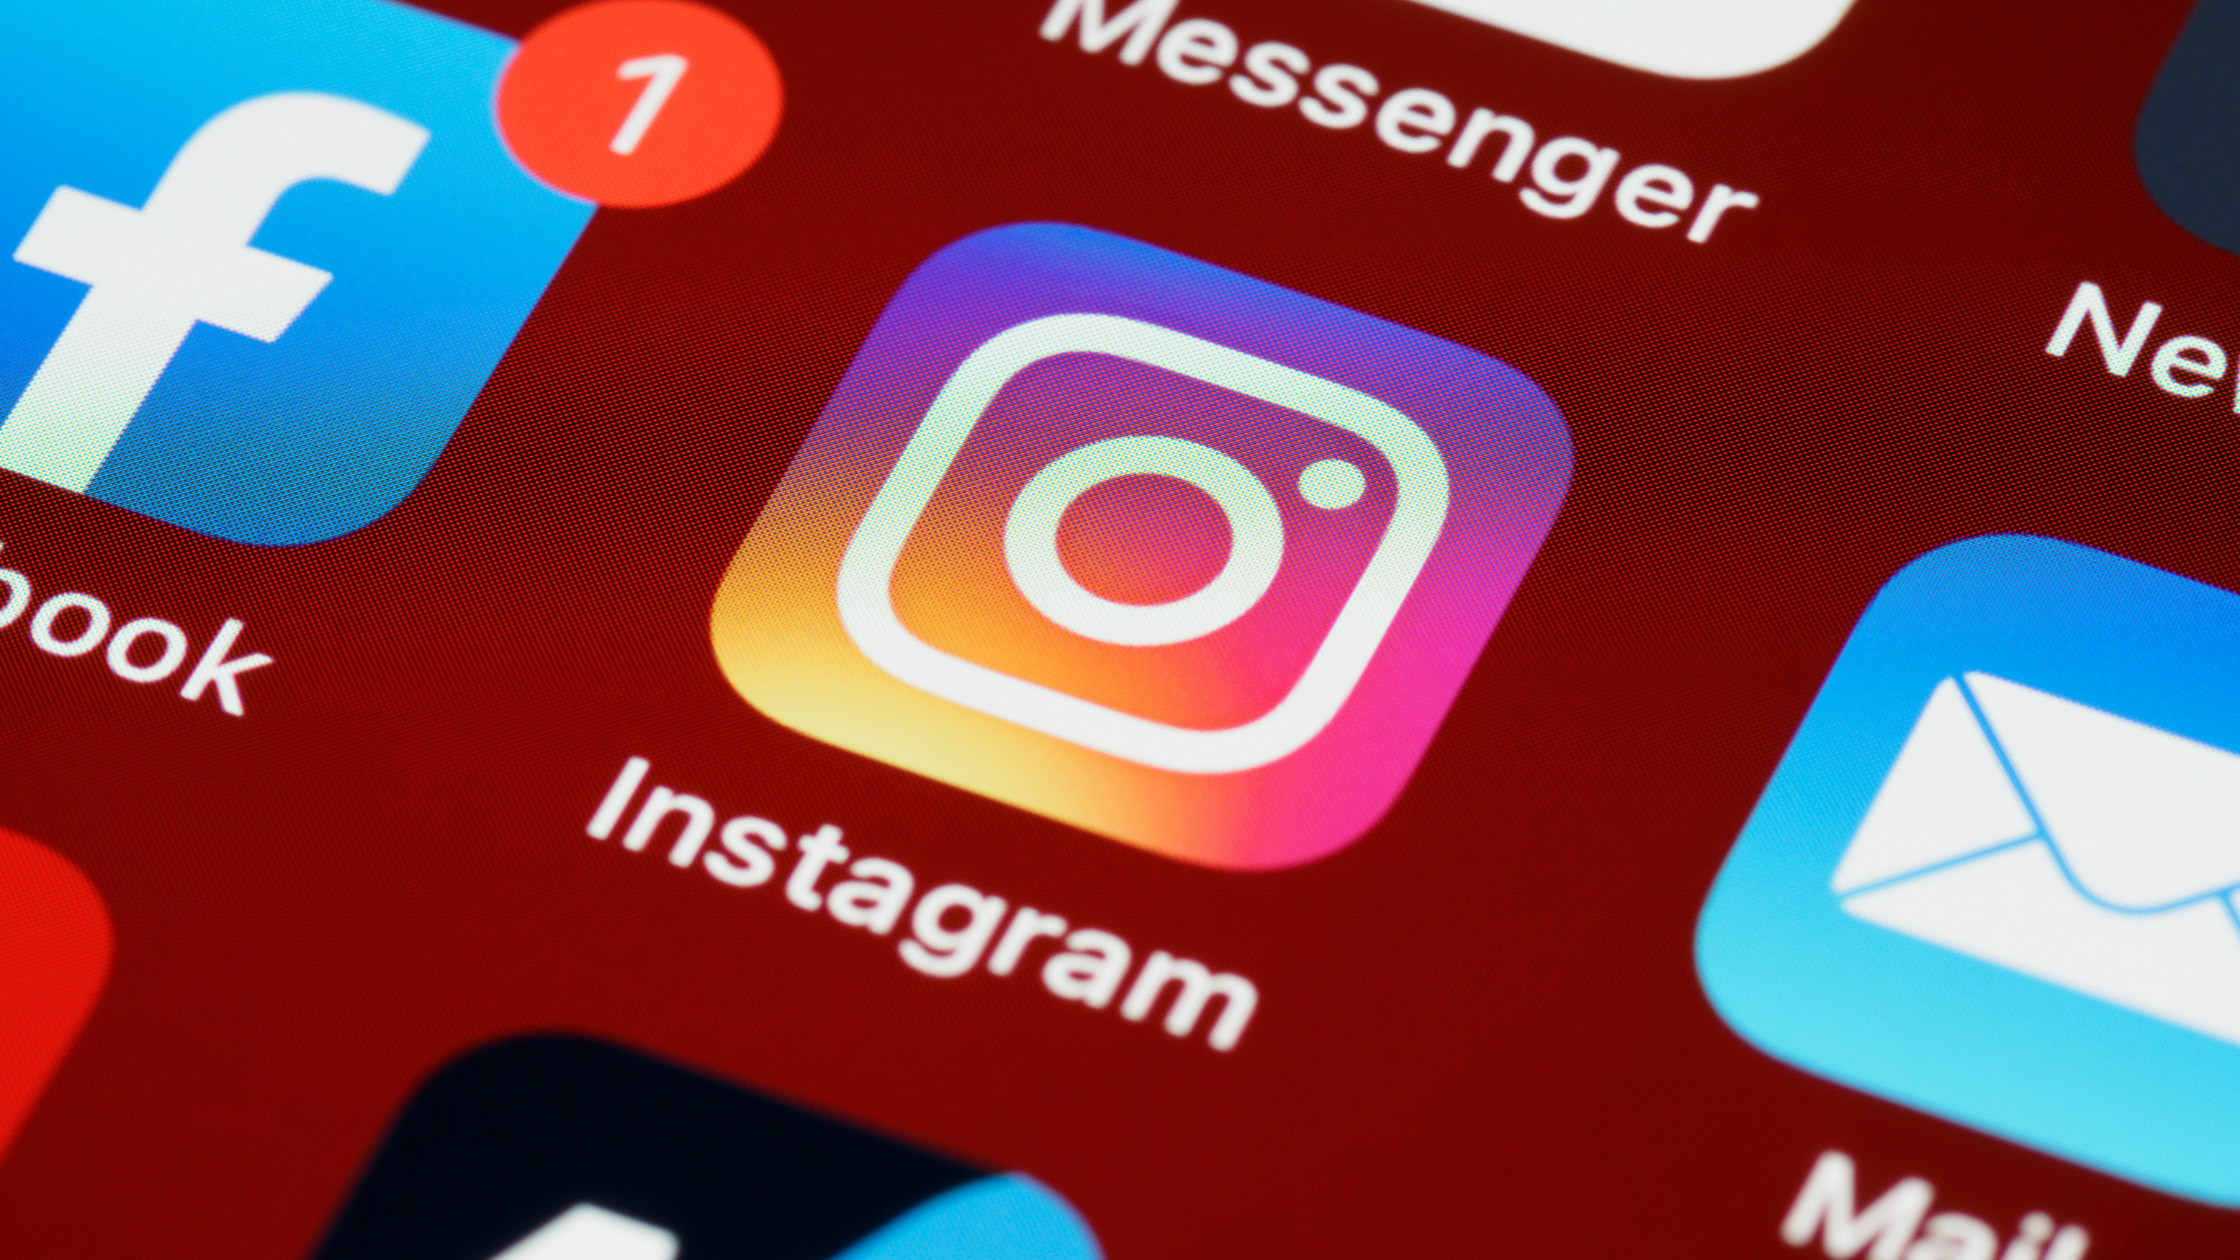 How to disable Instagram account?